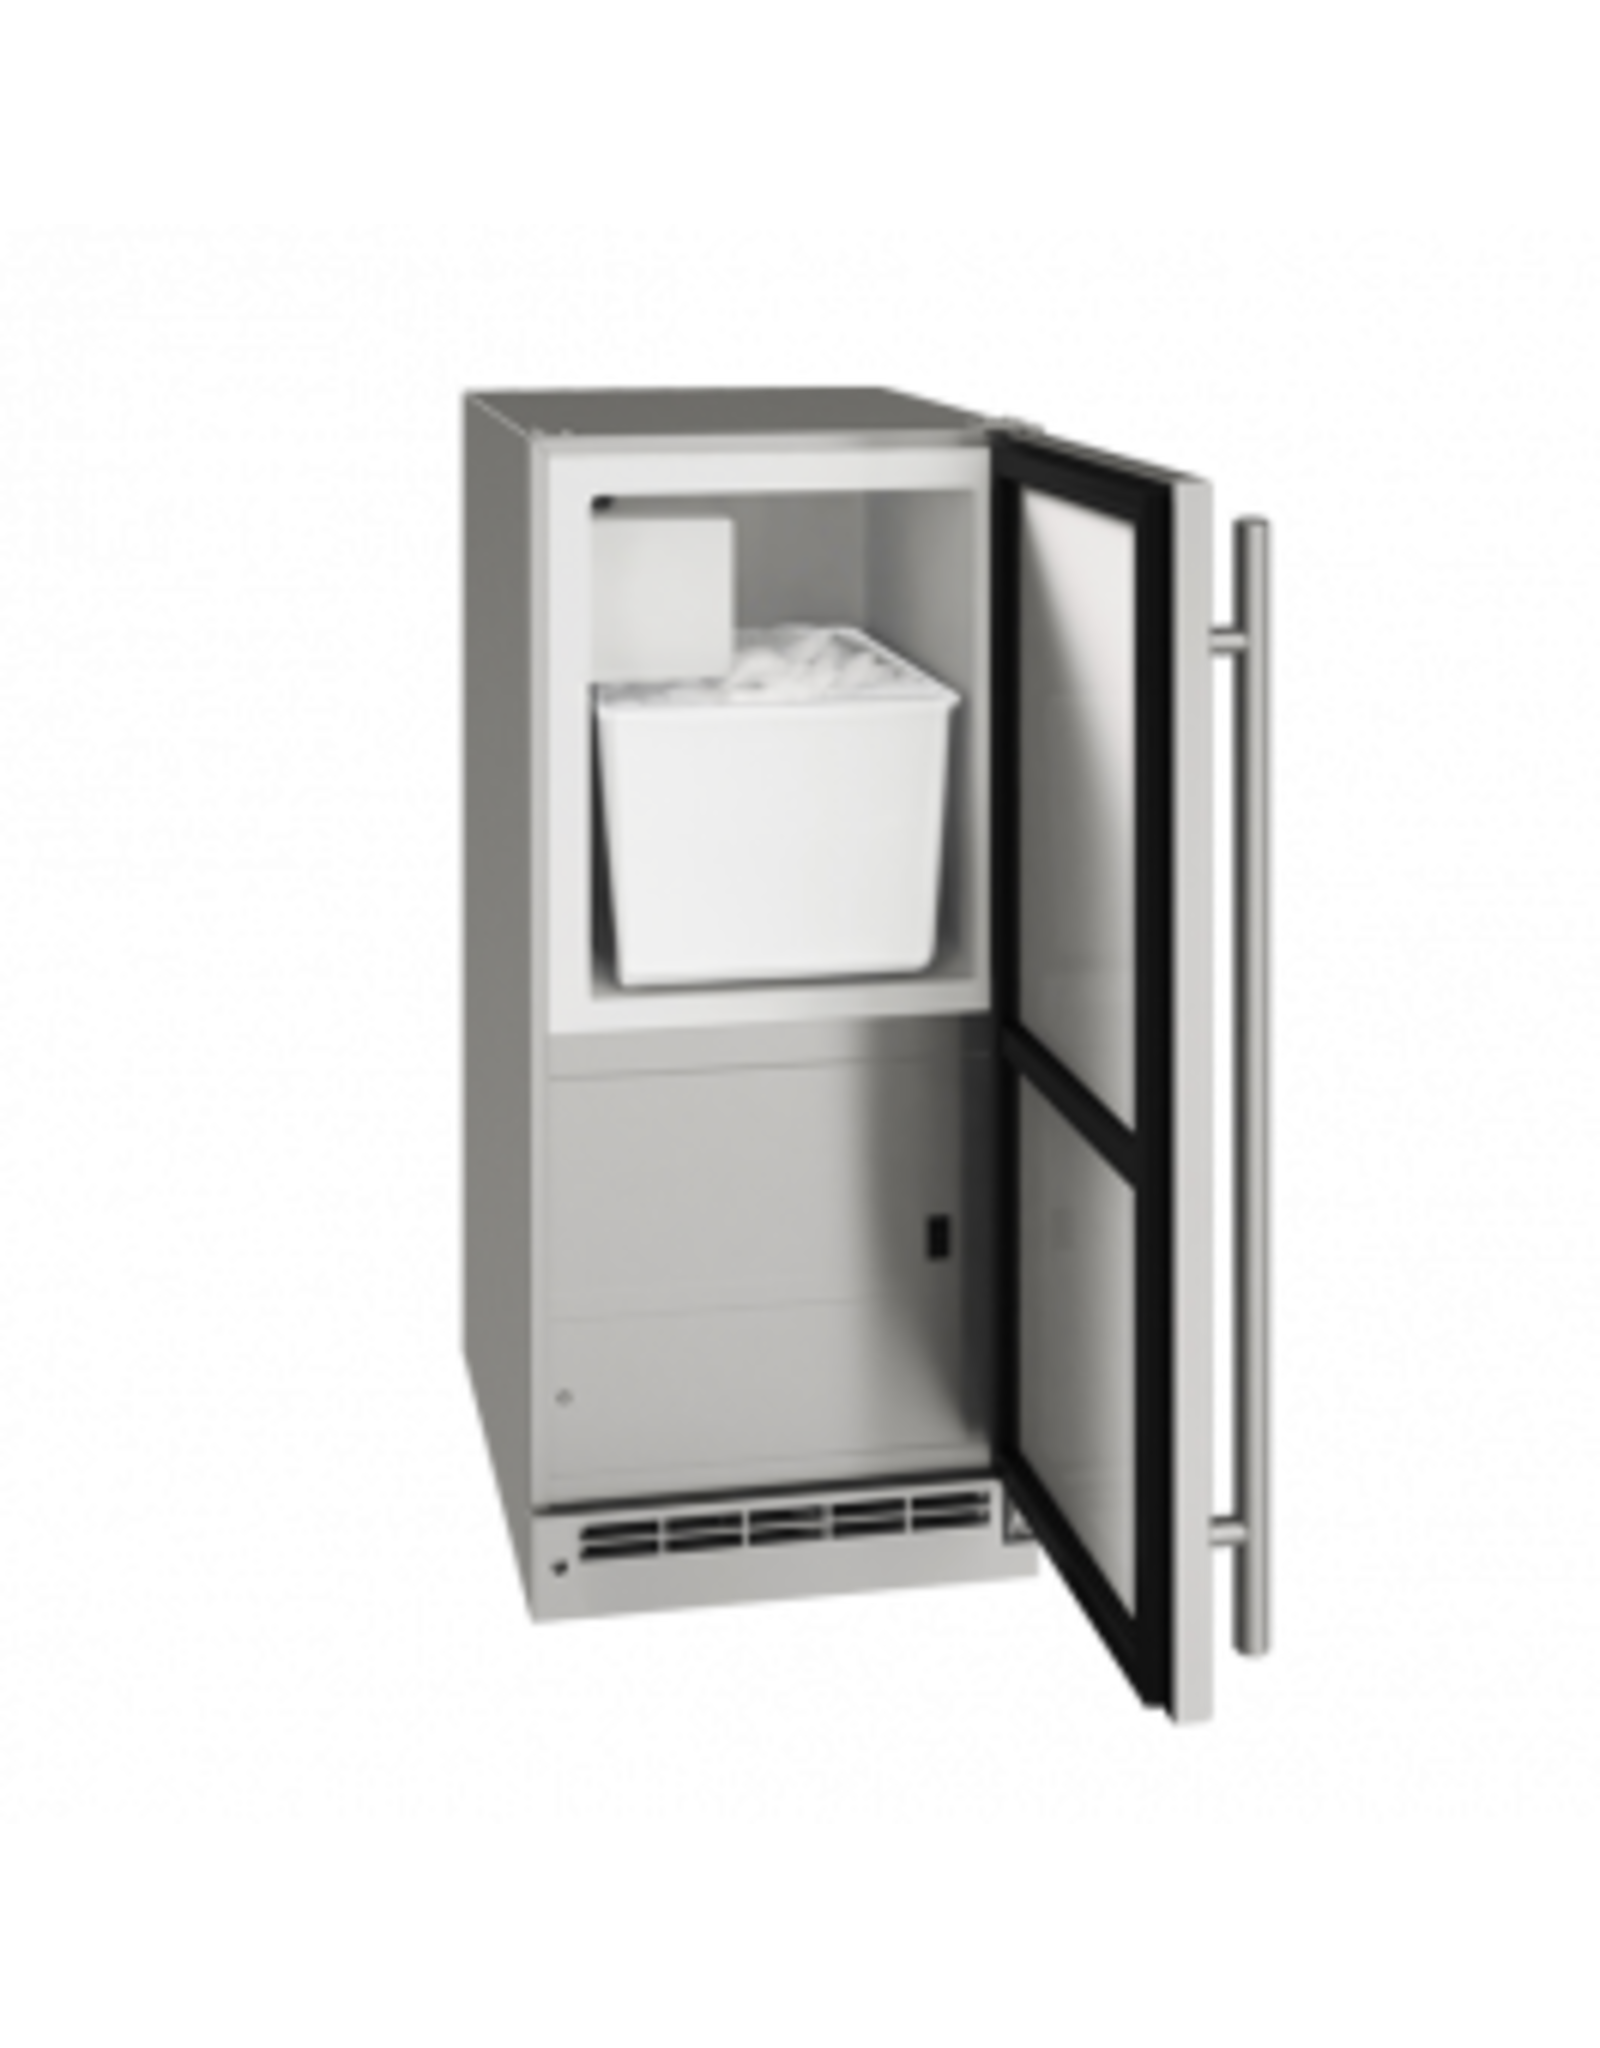 U-Line UOCR115-SS01A   Finish: Stainless Steel Solid Open U-Line 15 Inch Wide 25 Lbs. Storage Capacity Built-In or Free Standing Outdoor Ice Maker with 25 Lbs. Daily Ice Production